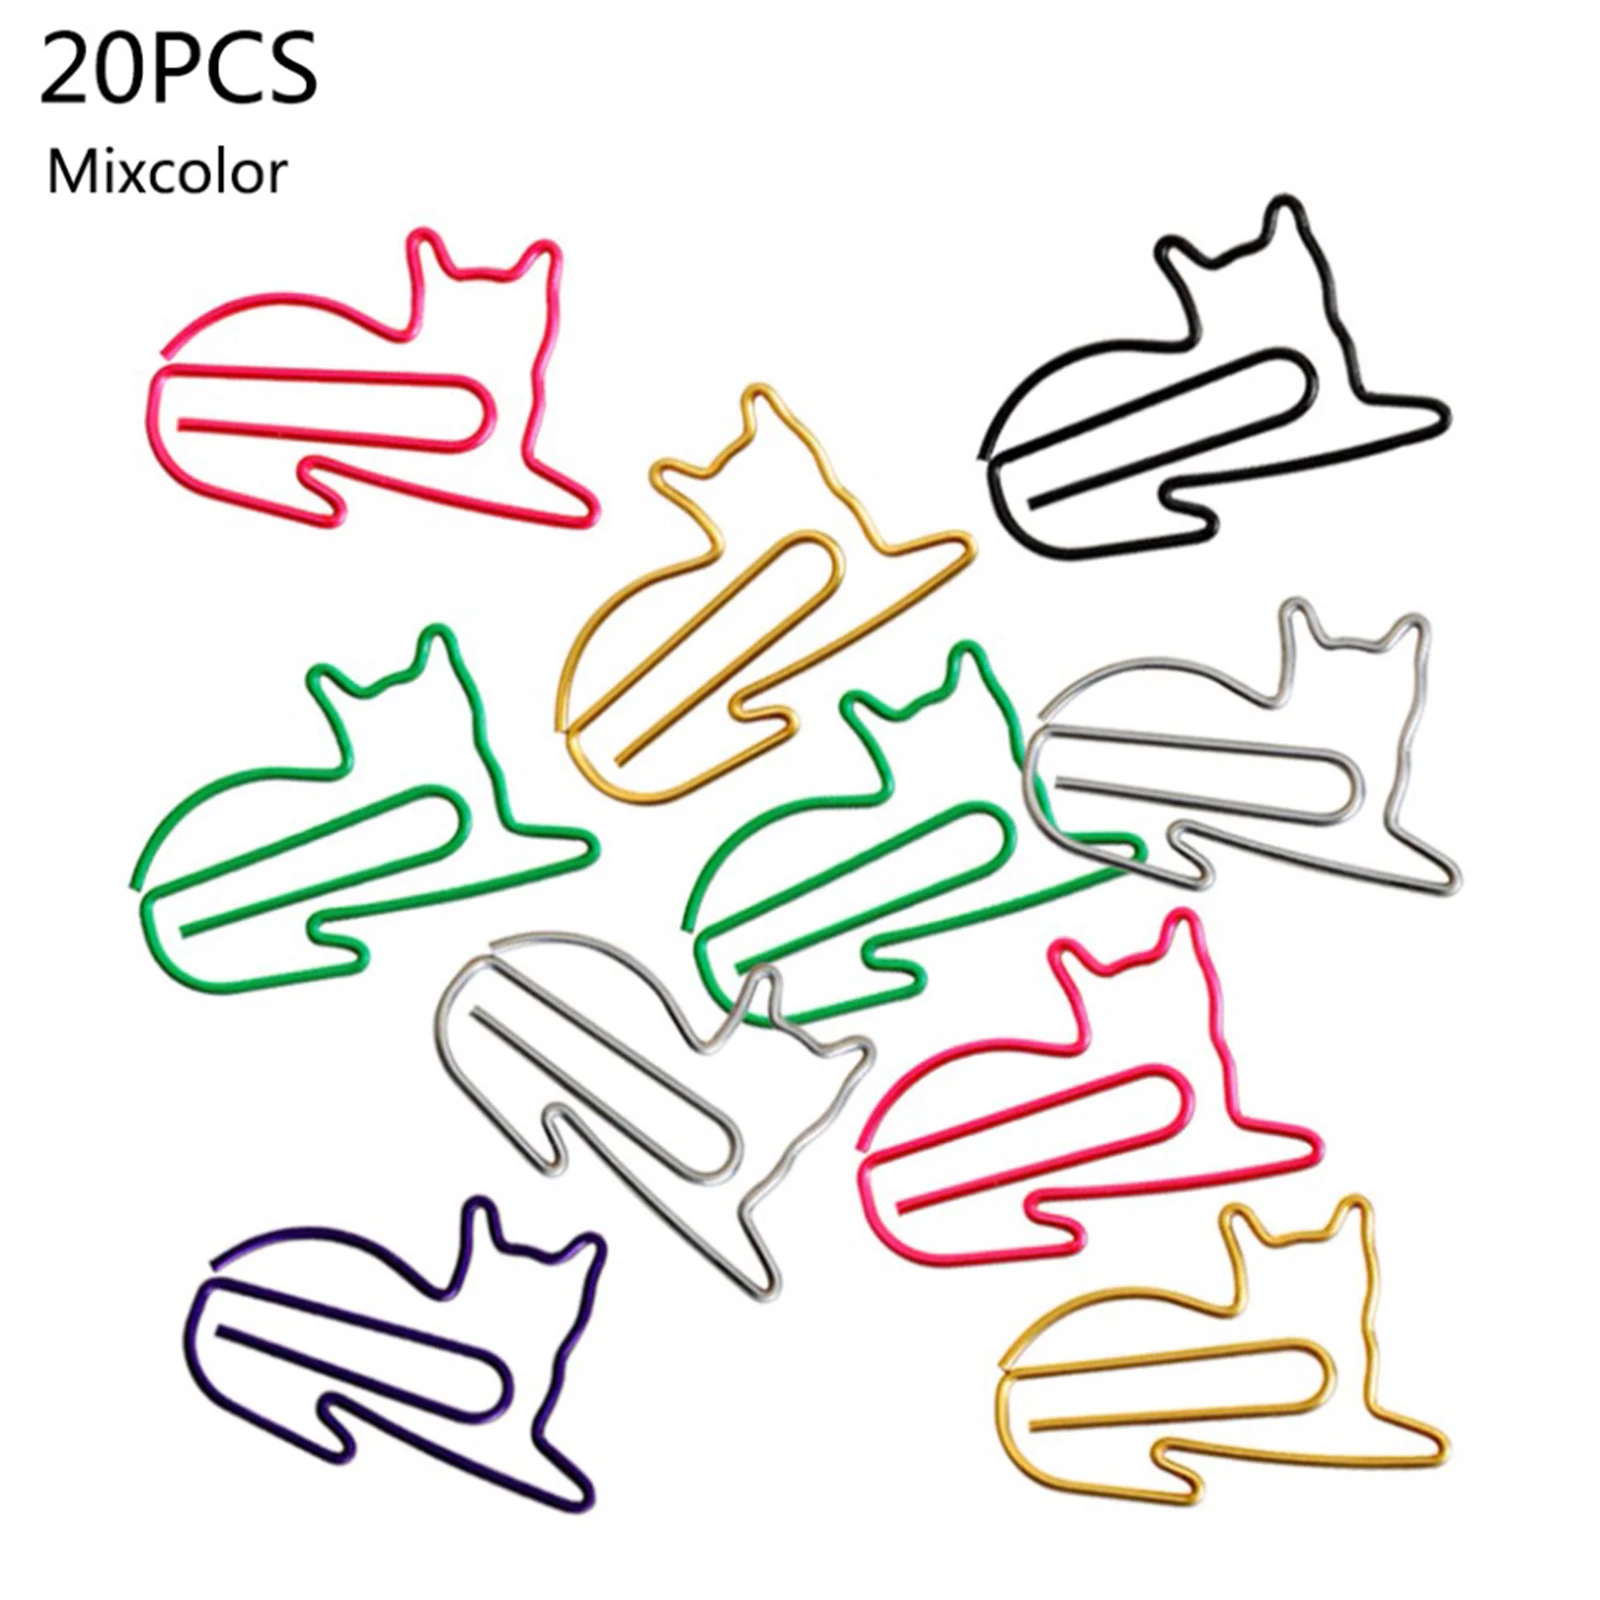 20pcs Cute Cat Shaped Metal Paper Clip Bookmark Planner Memo Clips For Book blue slippers shaped paper clip bookmark decoration office paperclip cute paper clips decorative planner clip planner clips klip